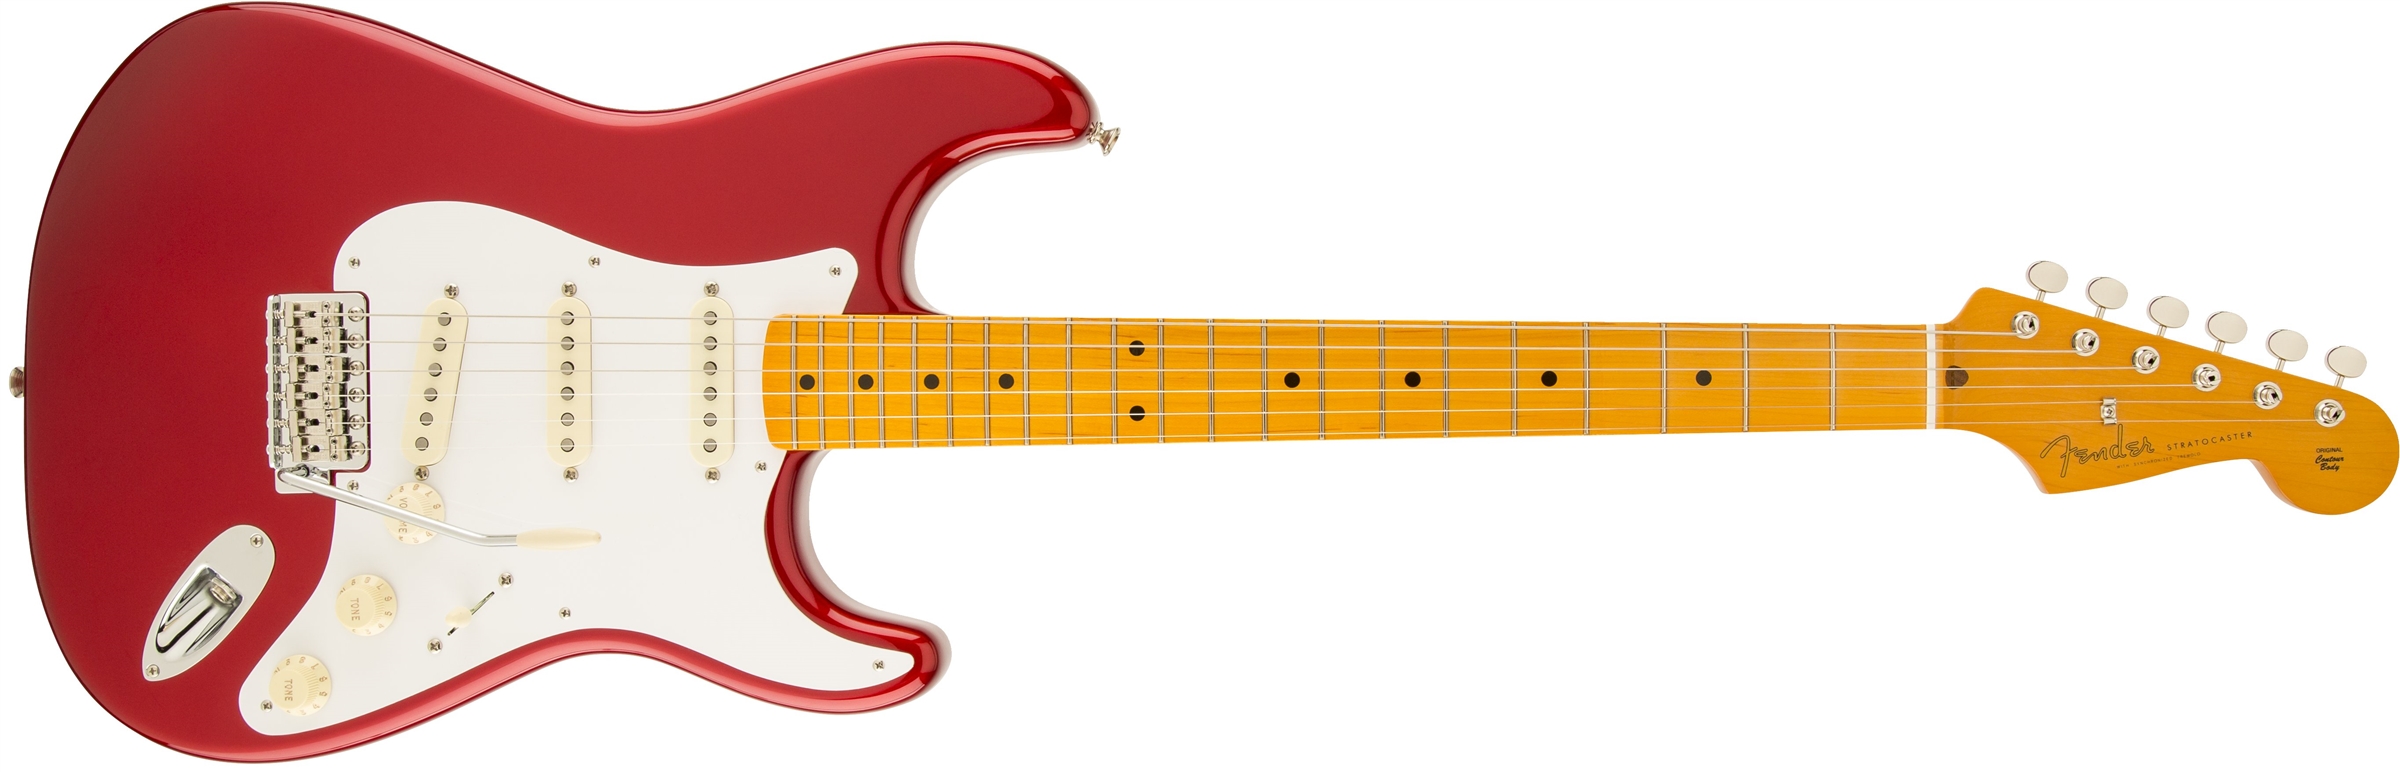 gateway human resources Reassure Classic '50s Stratocaster Lacquer Fender - Audiofanzine